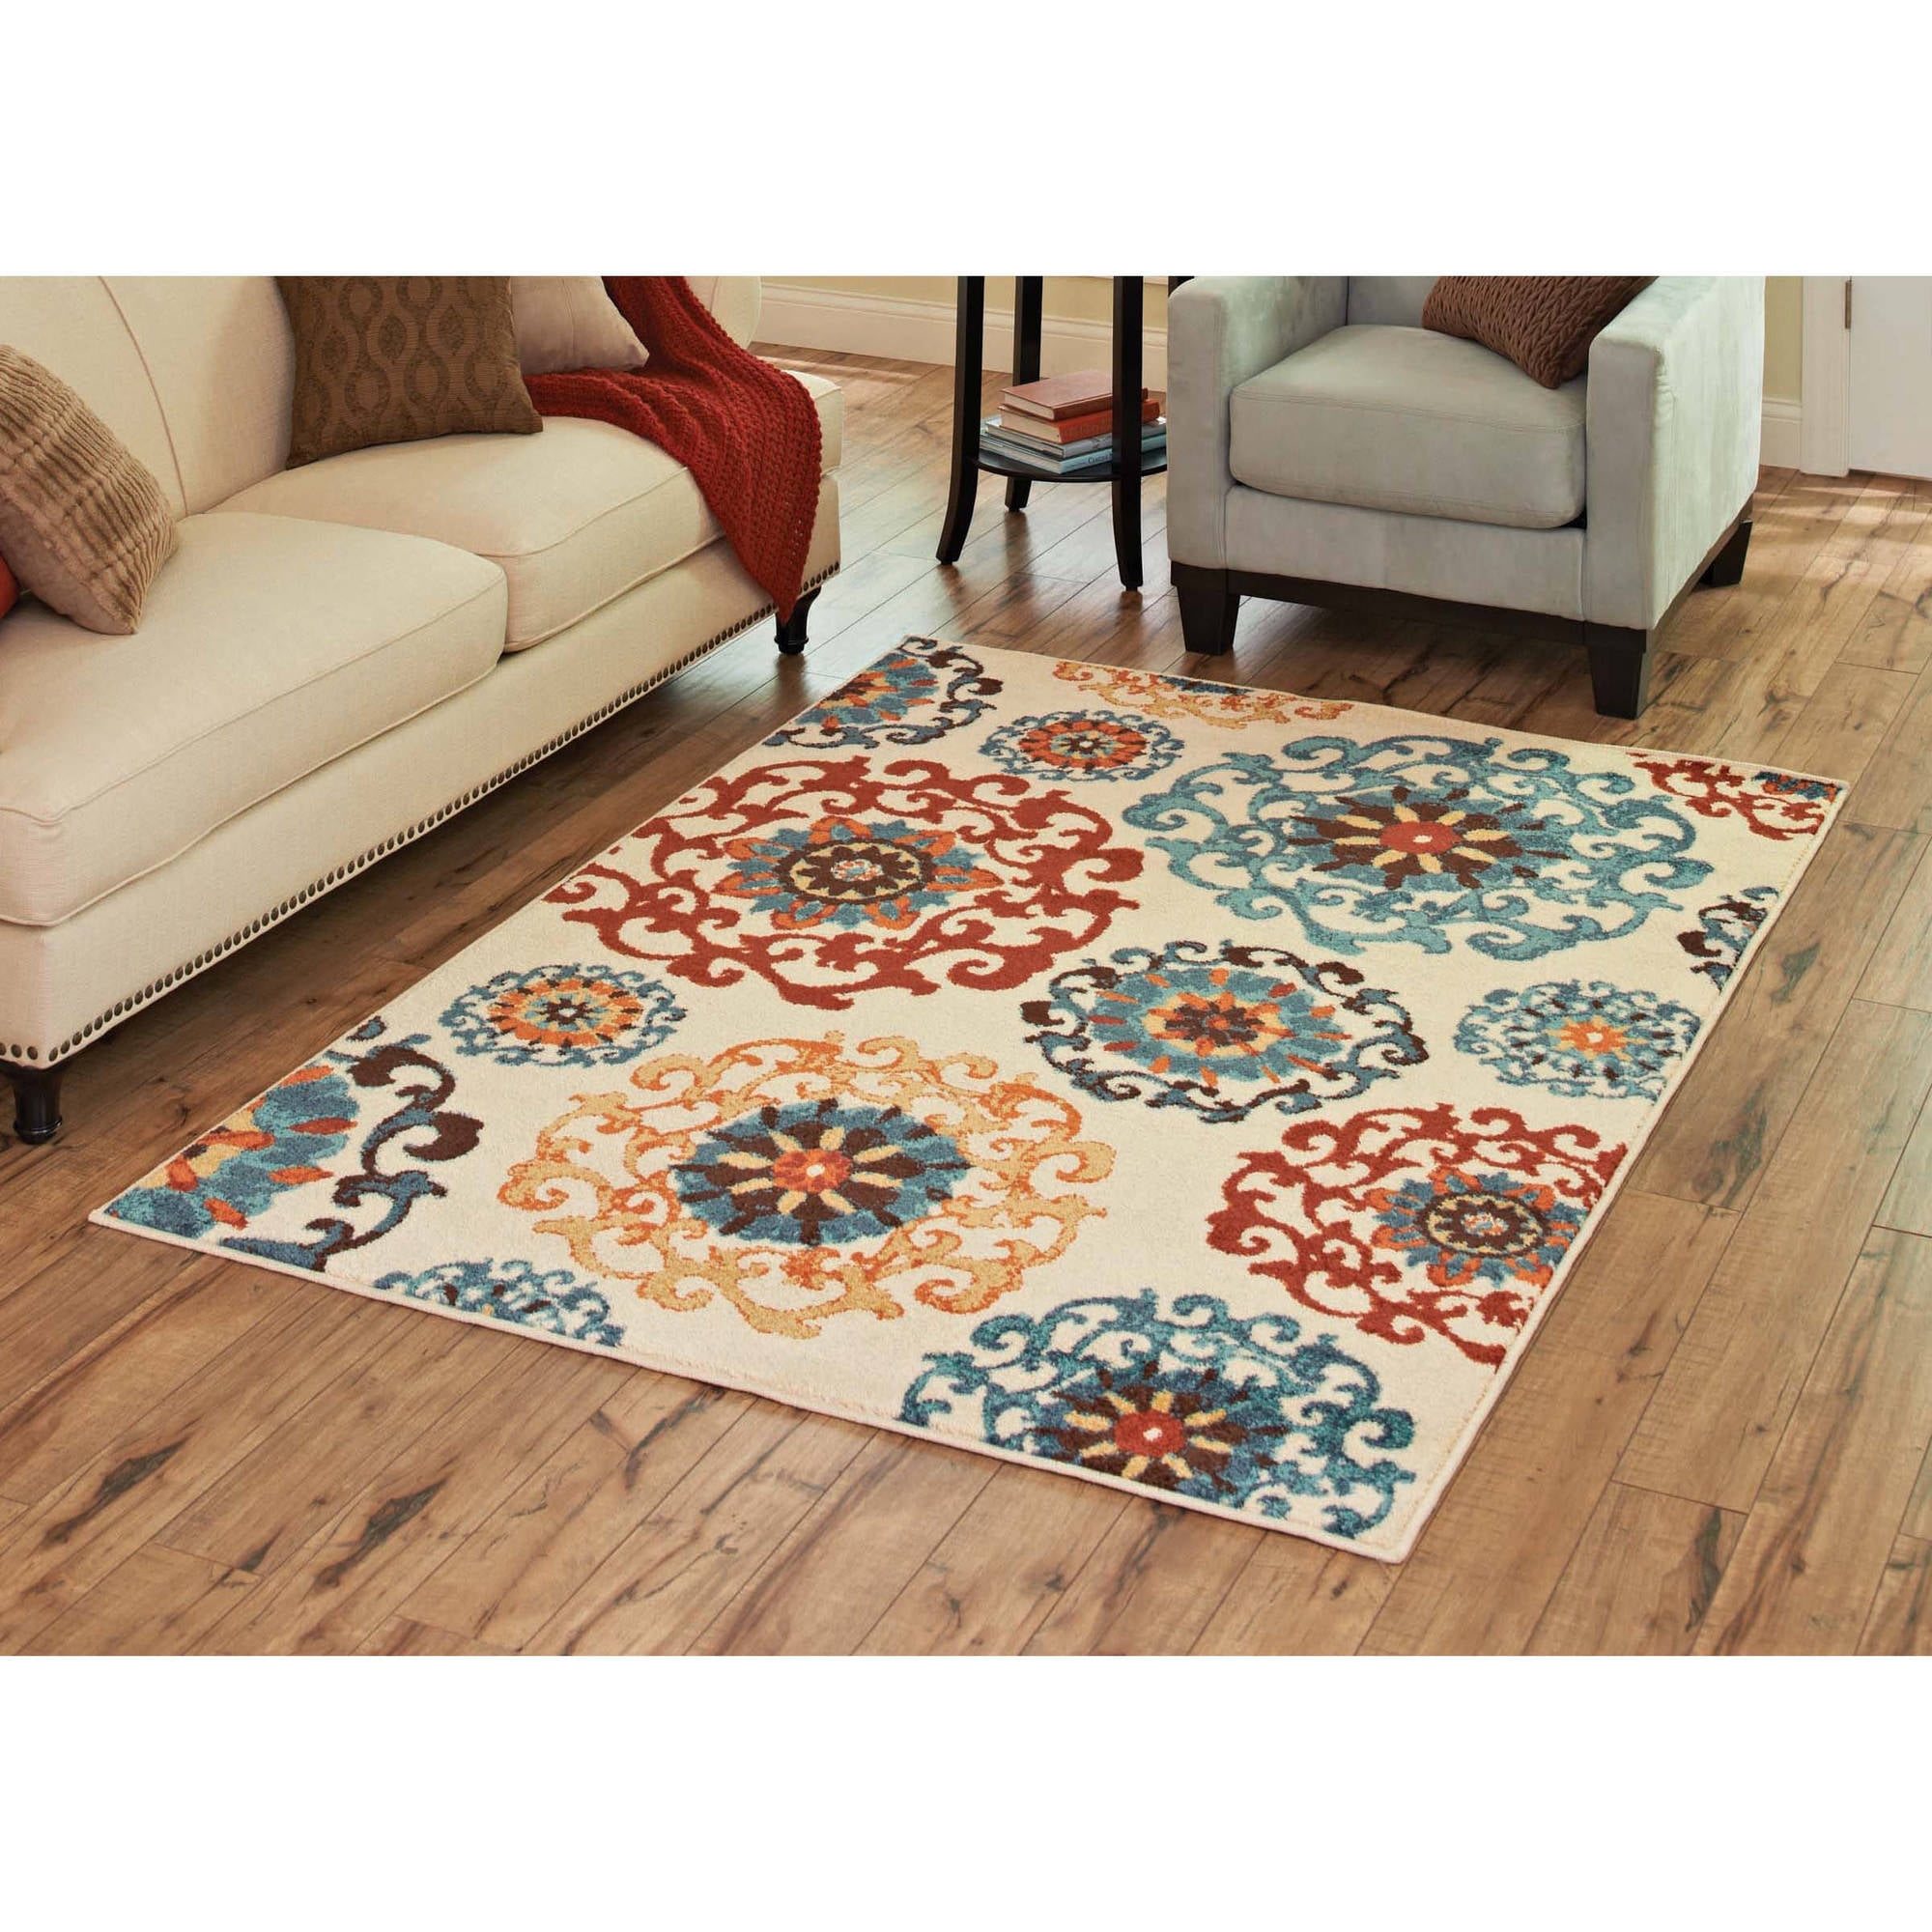 Area Rug Sets Unusual Windows Entry With Spanish Woven Area Rug